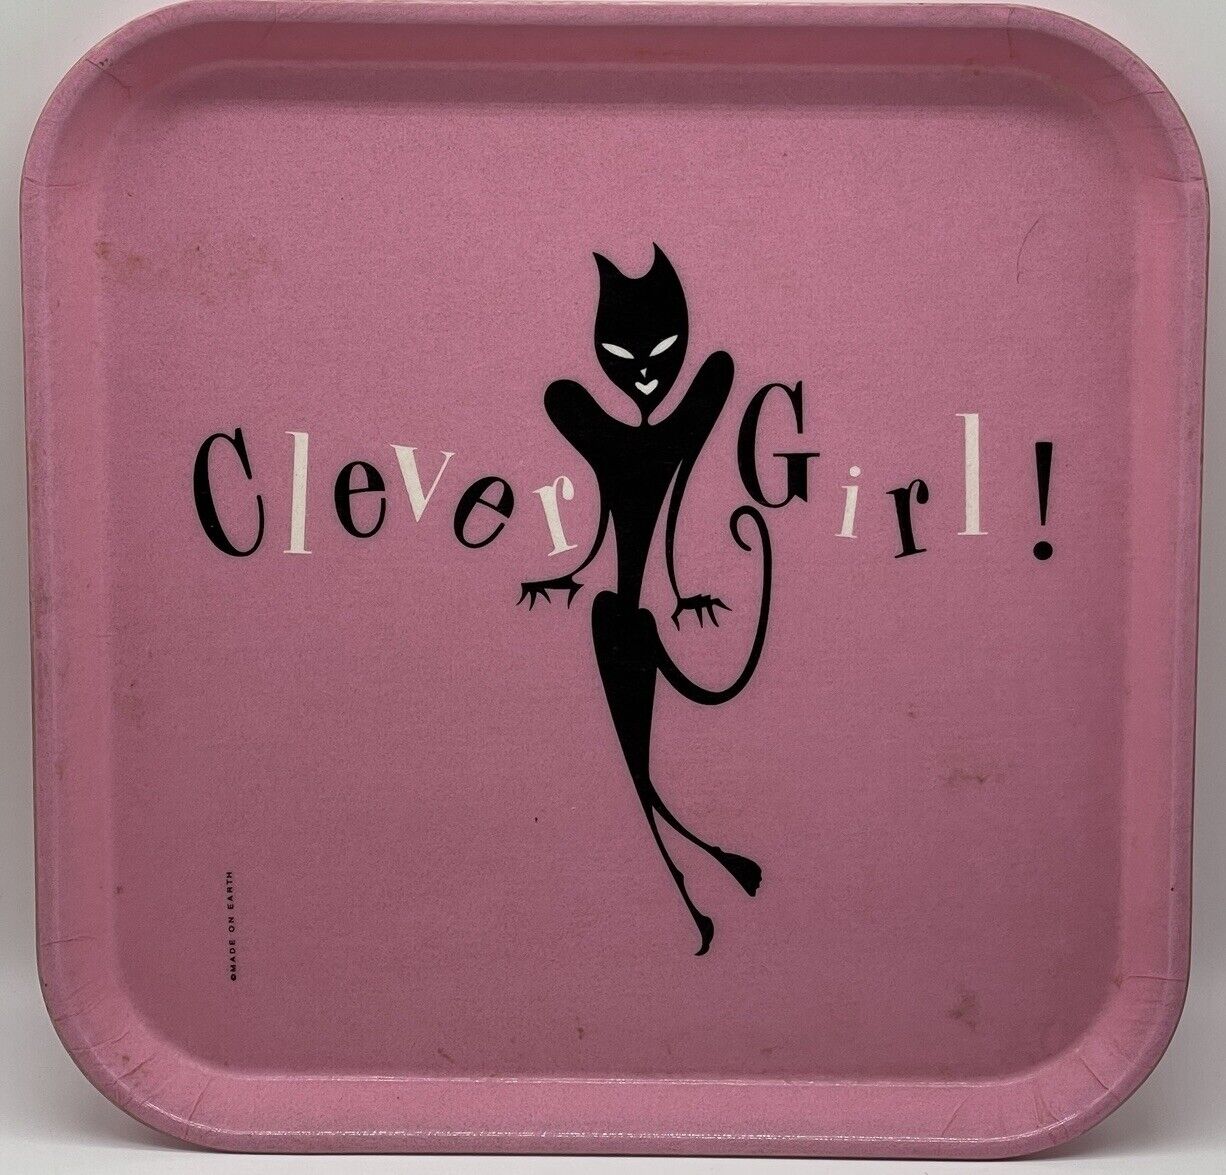 Vintage Camtray Kitschy Black Cat Lady Pink Collectible Tray Retro Atomic Rare